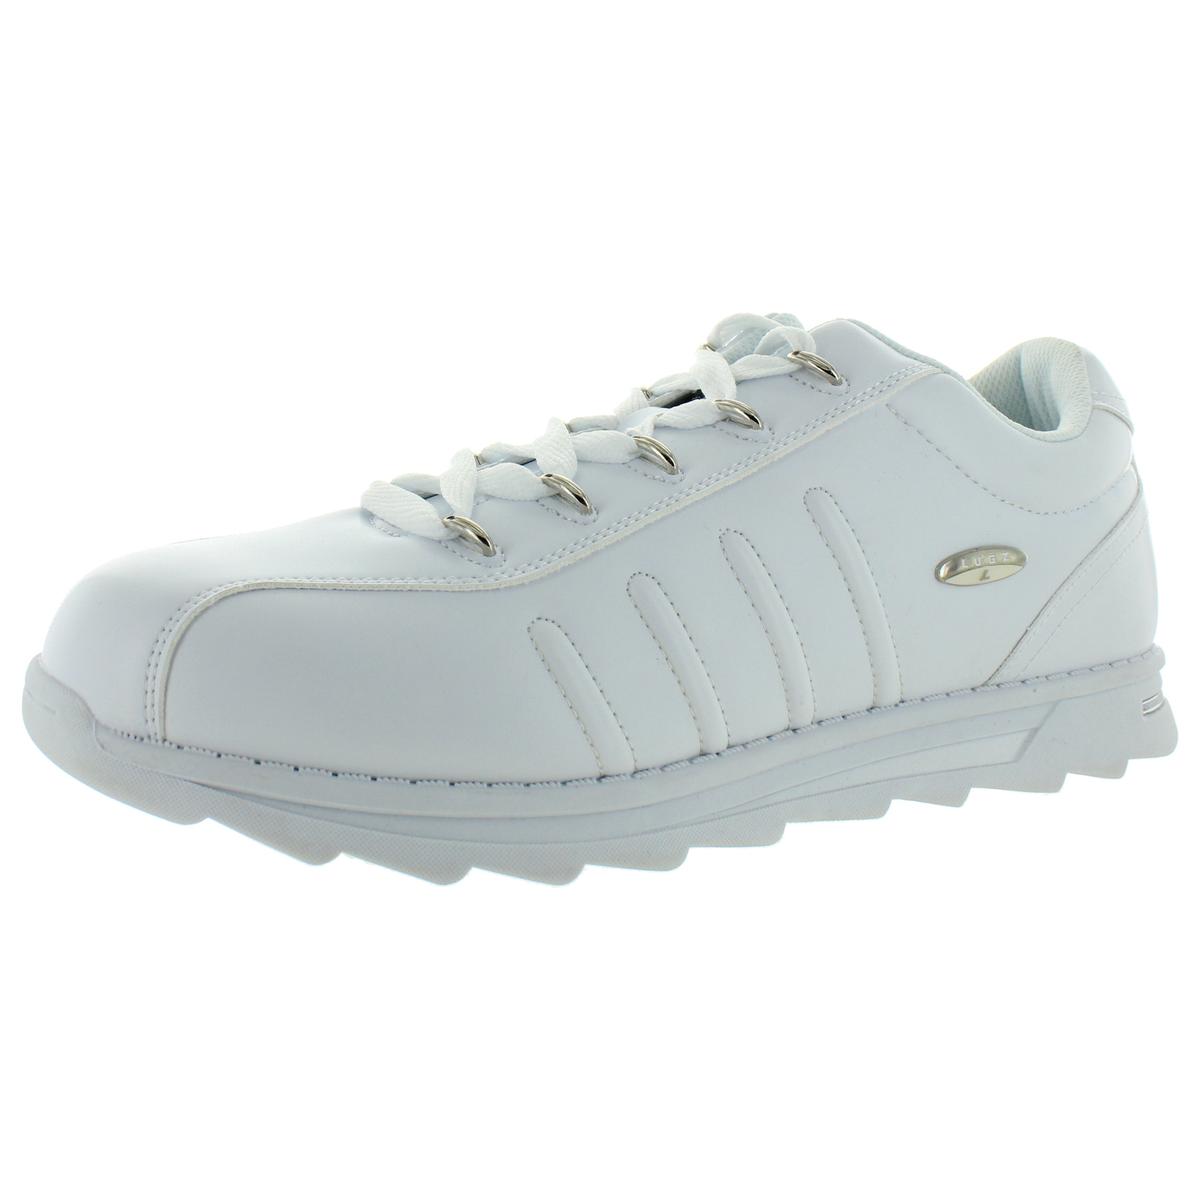 Lugz Mens Changeover II White Lace-Up Sneakers Shoes 10 Medium (D) BHFO ...